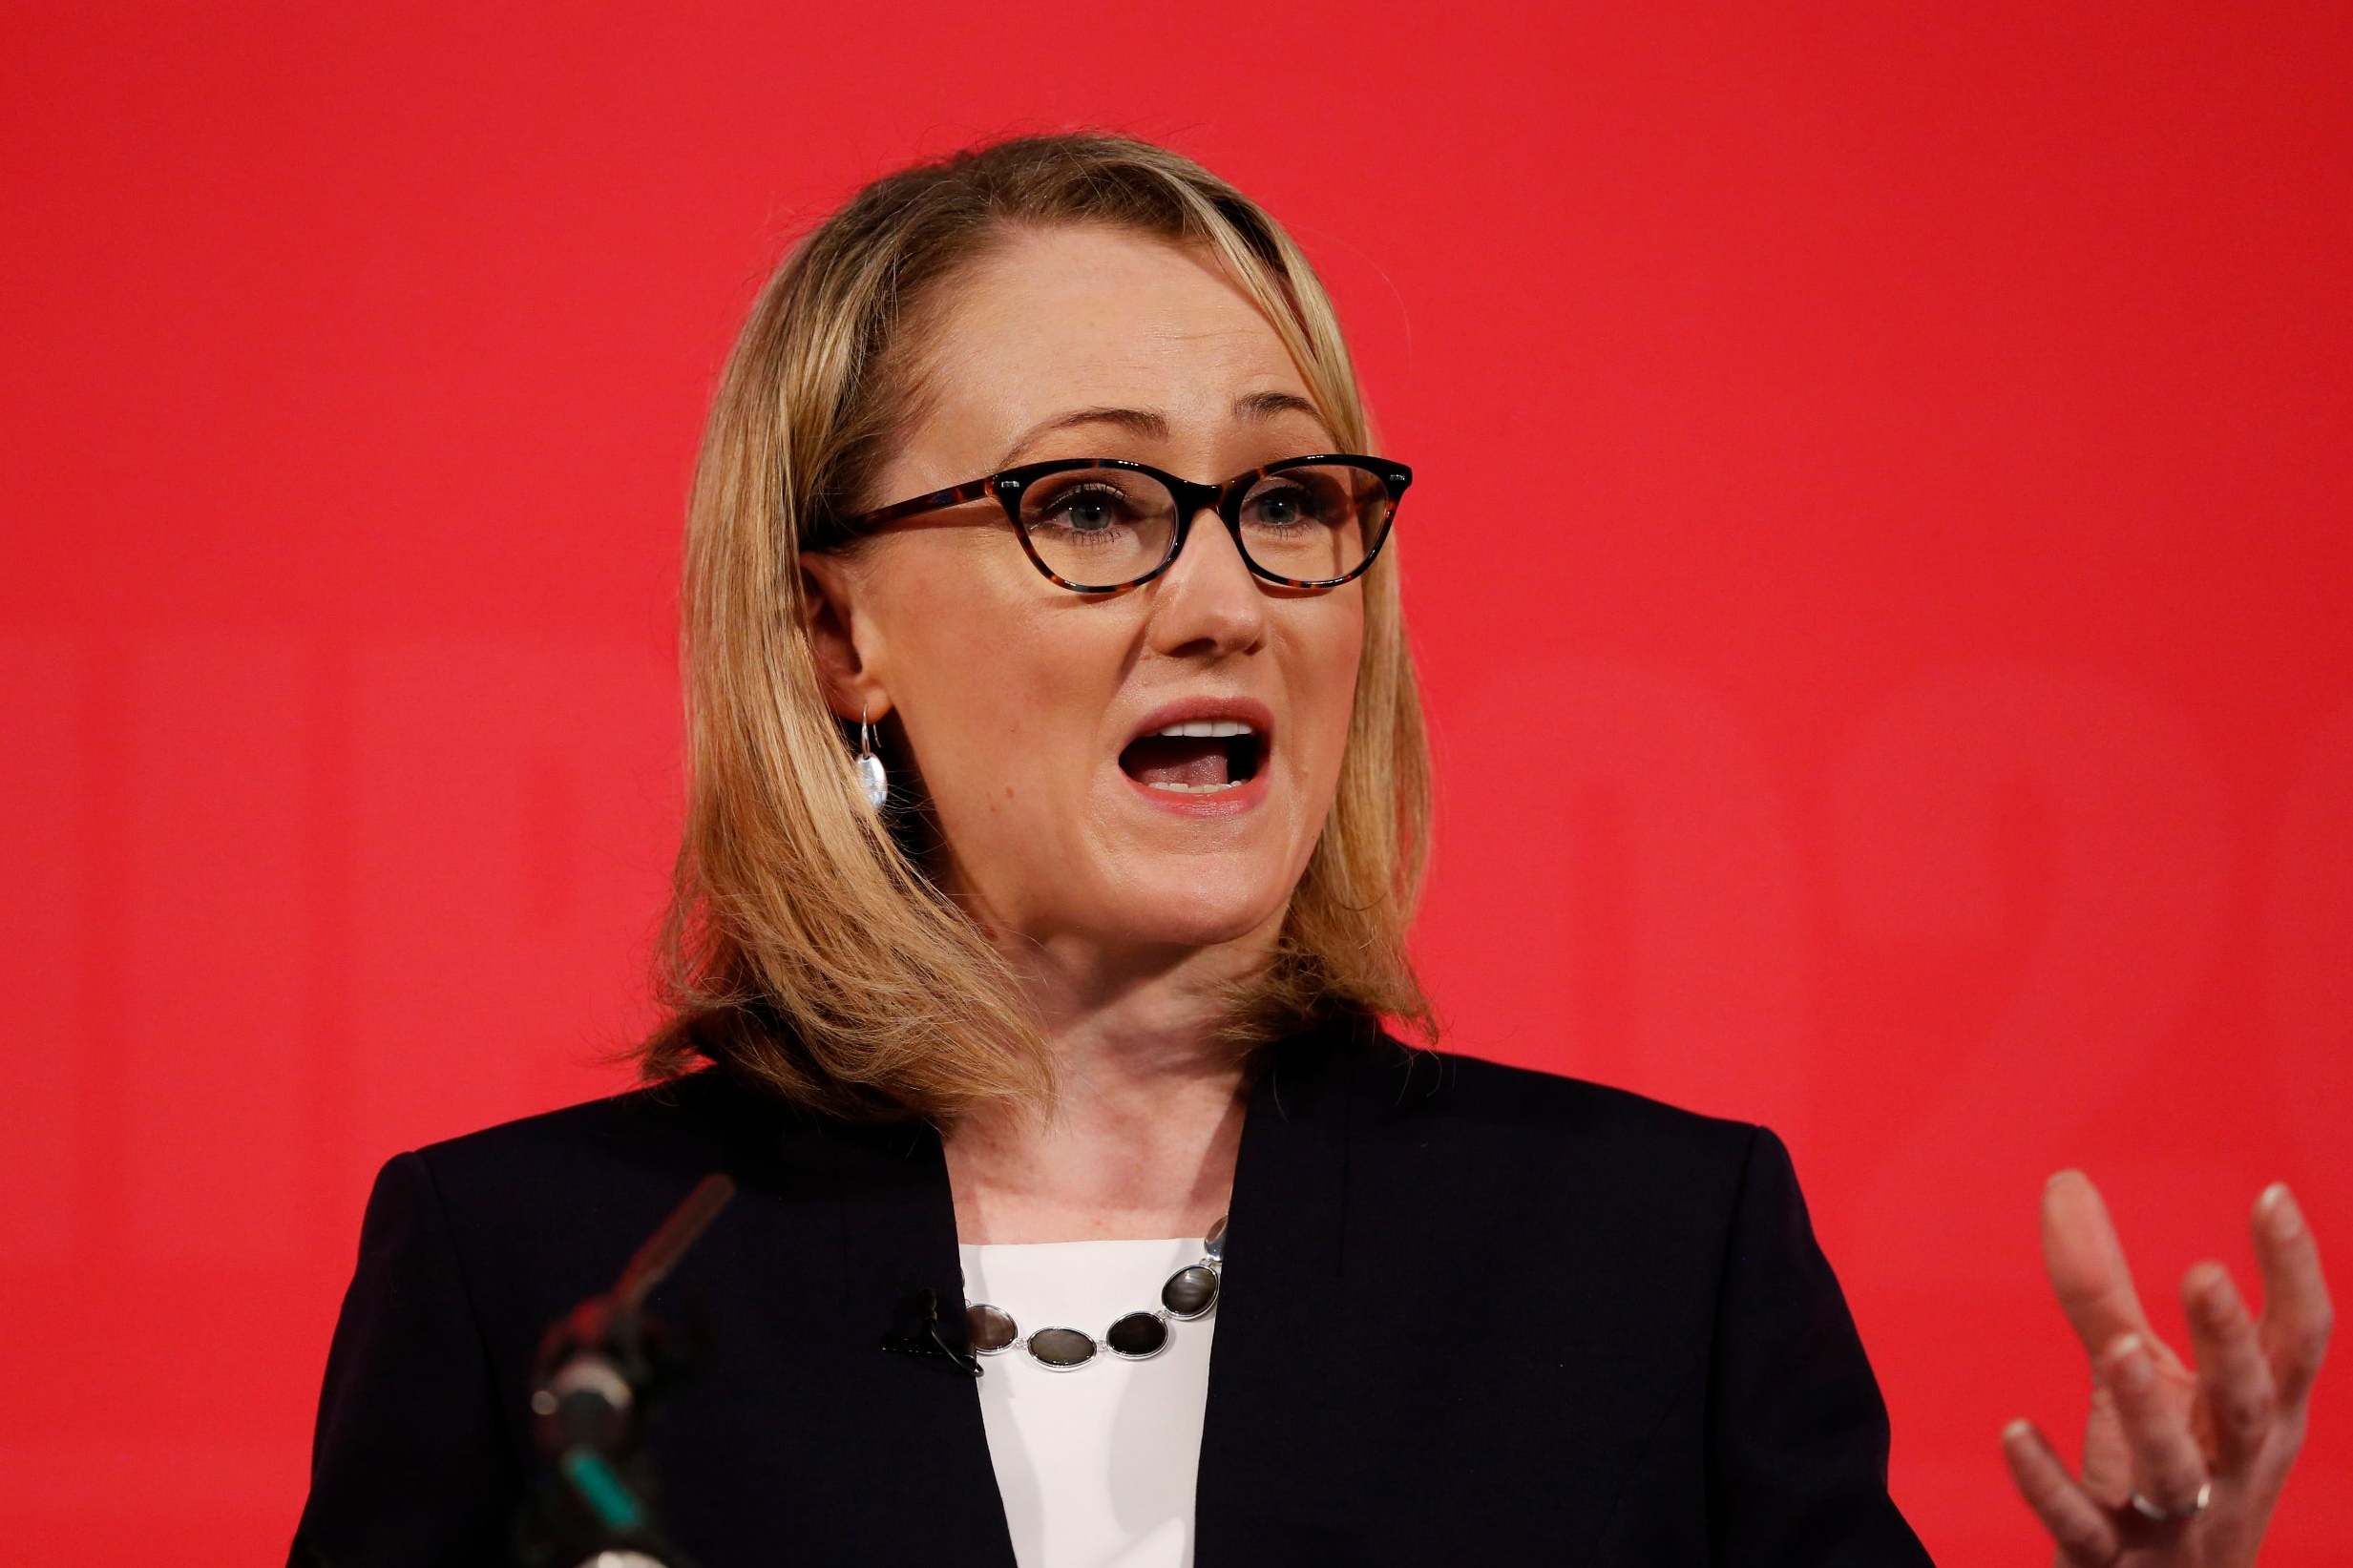 Coronavirus: Labour leadership candidate Rebecca Long-Bailey calls for universal basic income during pandemic